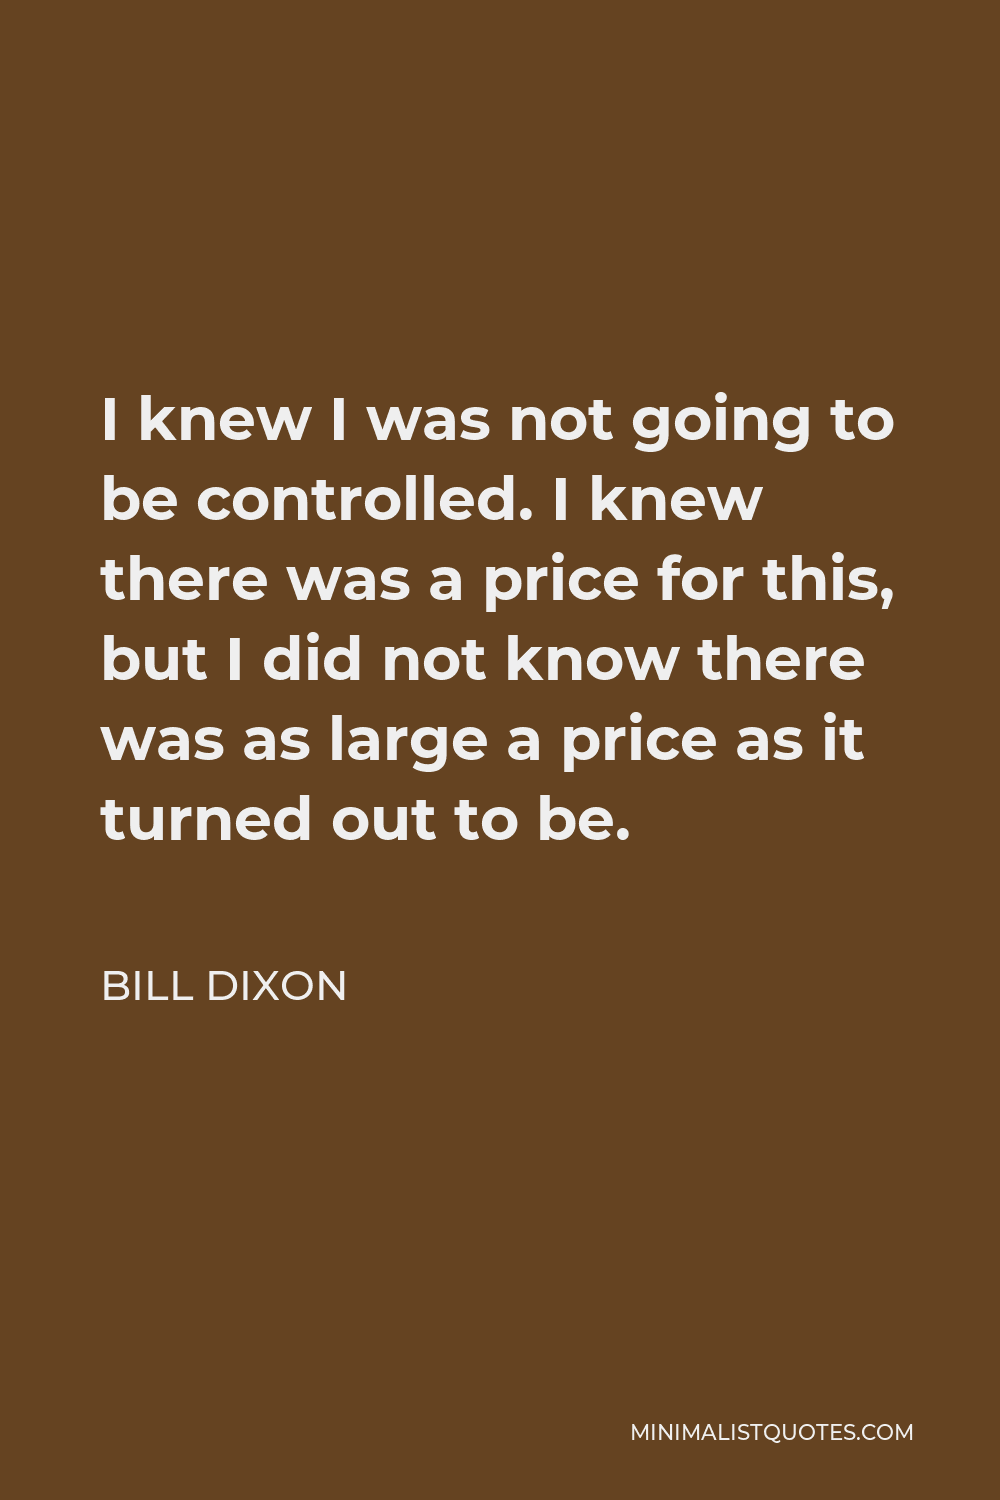 Bill Dixon Quote - I knew I was not going to be controlled. I knew there was a price for this, but I did not know there was as large a price as it turned out to be.